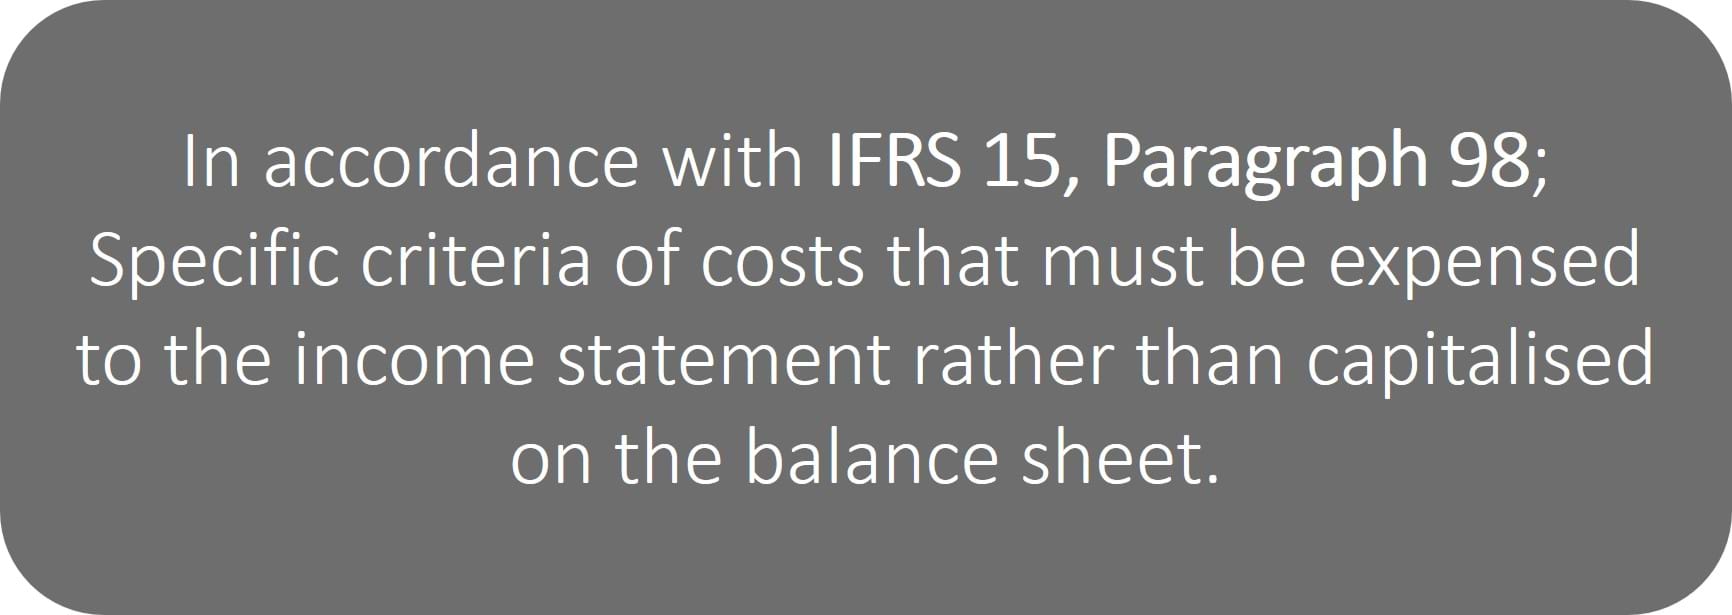 ifrs-15-paragraph-98.jpg